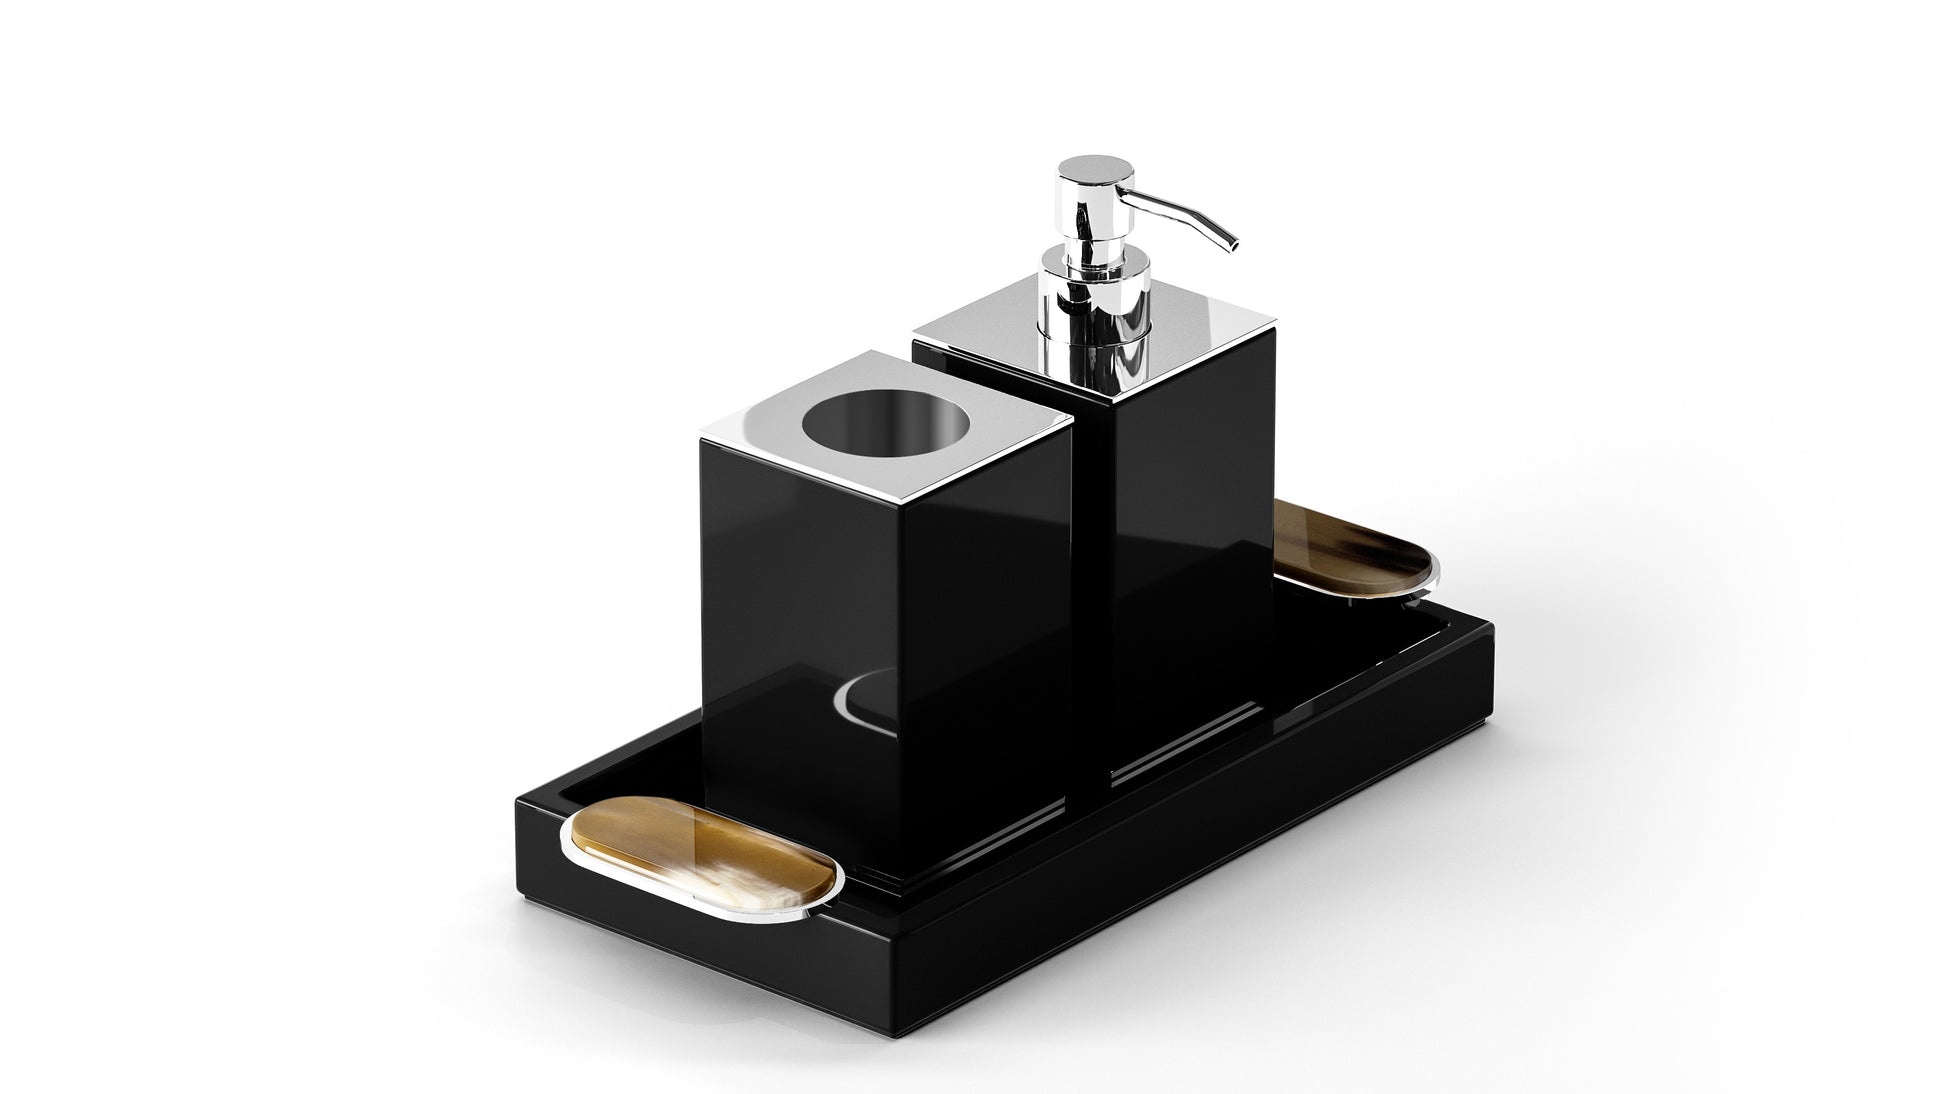 Arcahorn Argentella Toothbrush Holder | Wood with Lacquered Black Gloss Finish | Chromed Brass Detail | Elegant Bathroom Accessory | Perfect for Yacht Decor | Explore a Range of Luxury Home Accessories at 2Jour Concierge, #1 luxury high-end gift & lifestyle shop